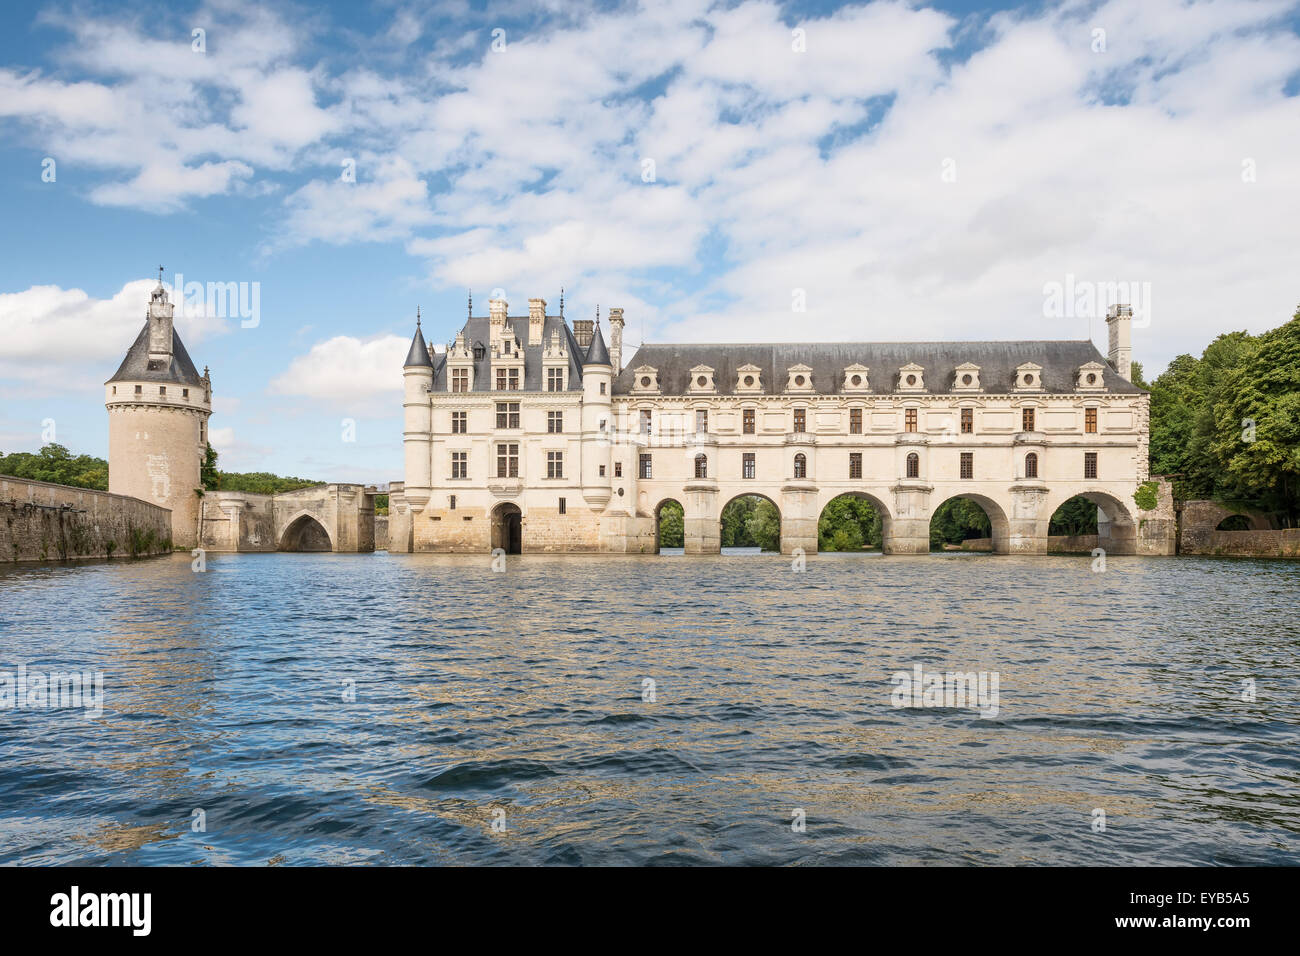 Chenonceau castle, built over the Cher river , Loire Valley,France, view from the river, on cloudu blue sky background. Stock Photo